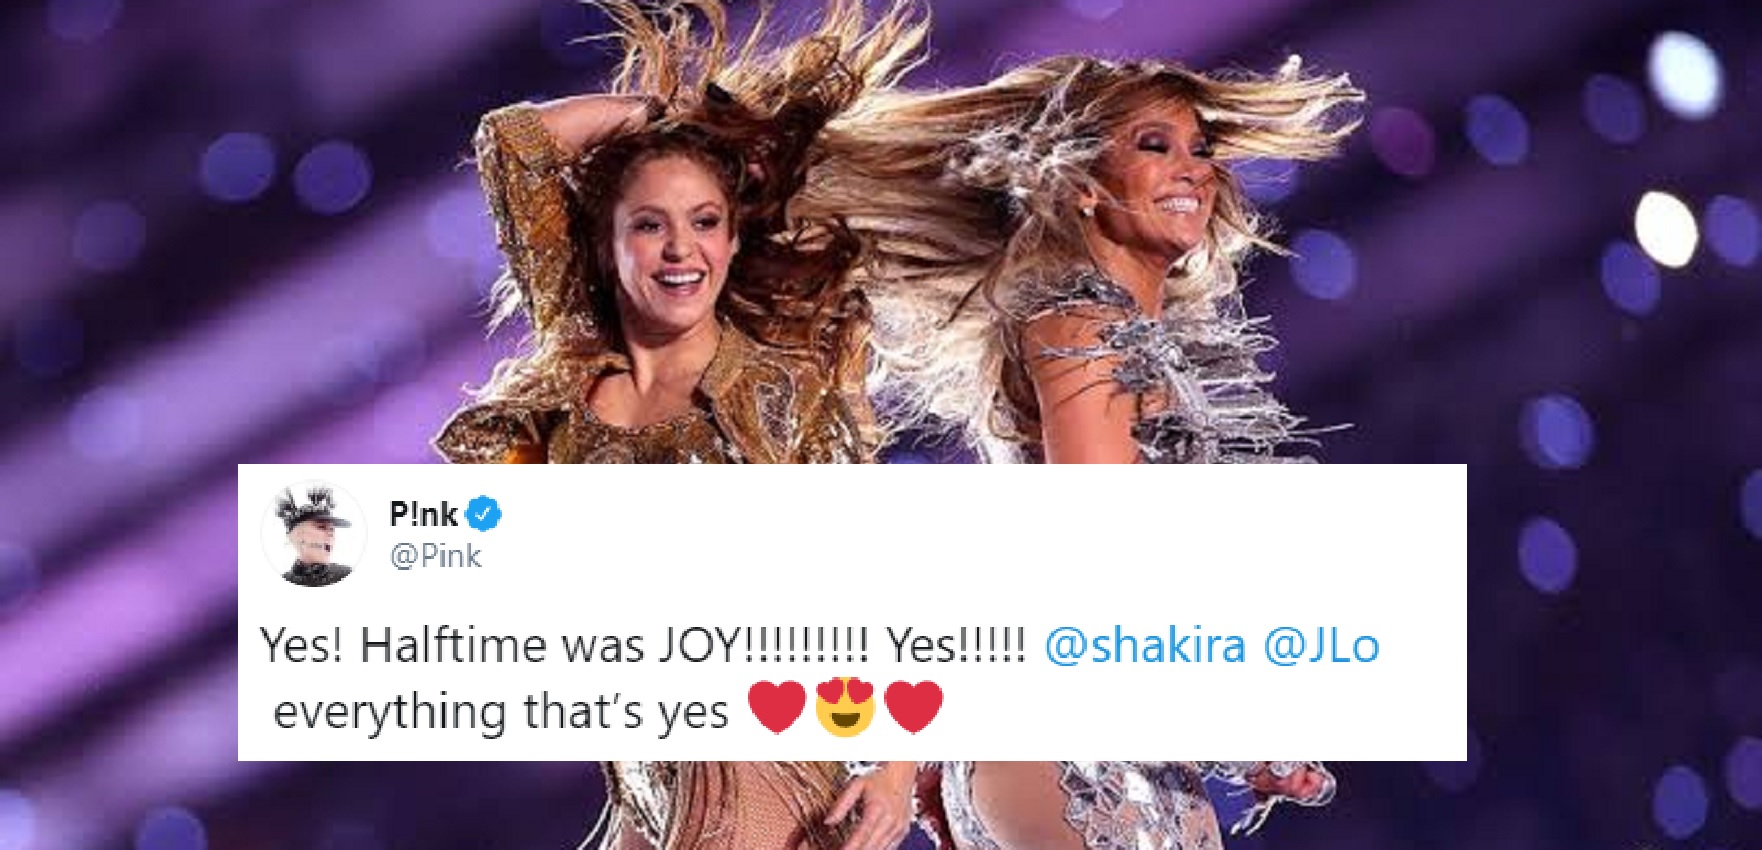 Check Out These Celebrity Reactions To Shakira and JLo’s Super Bowl Performance!